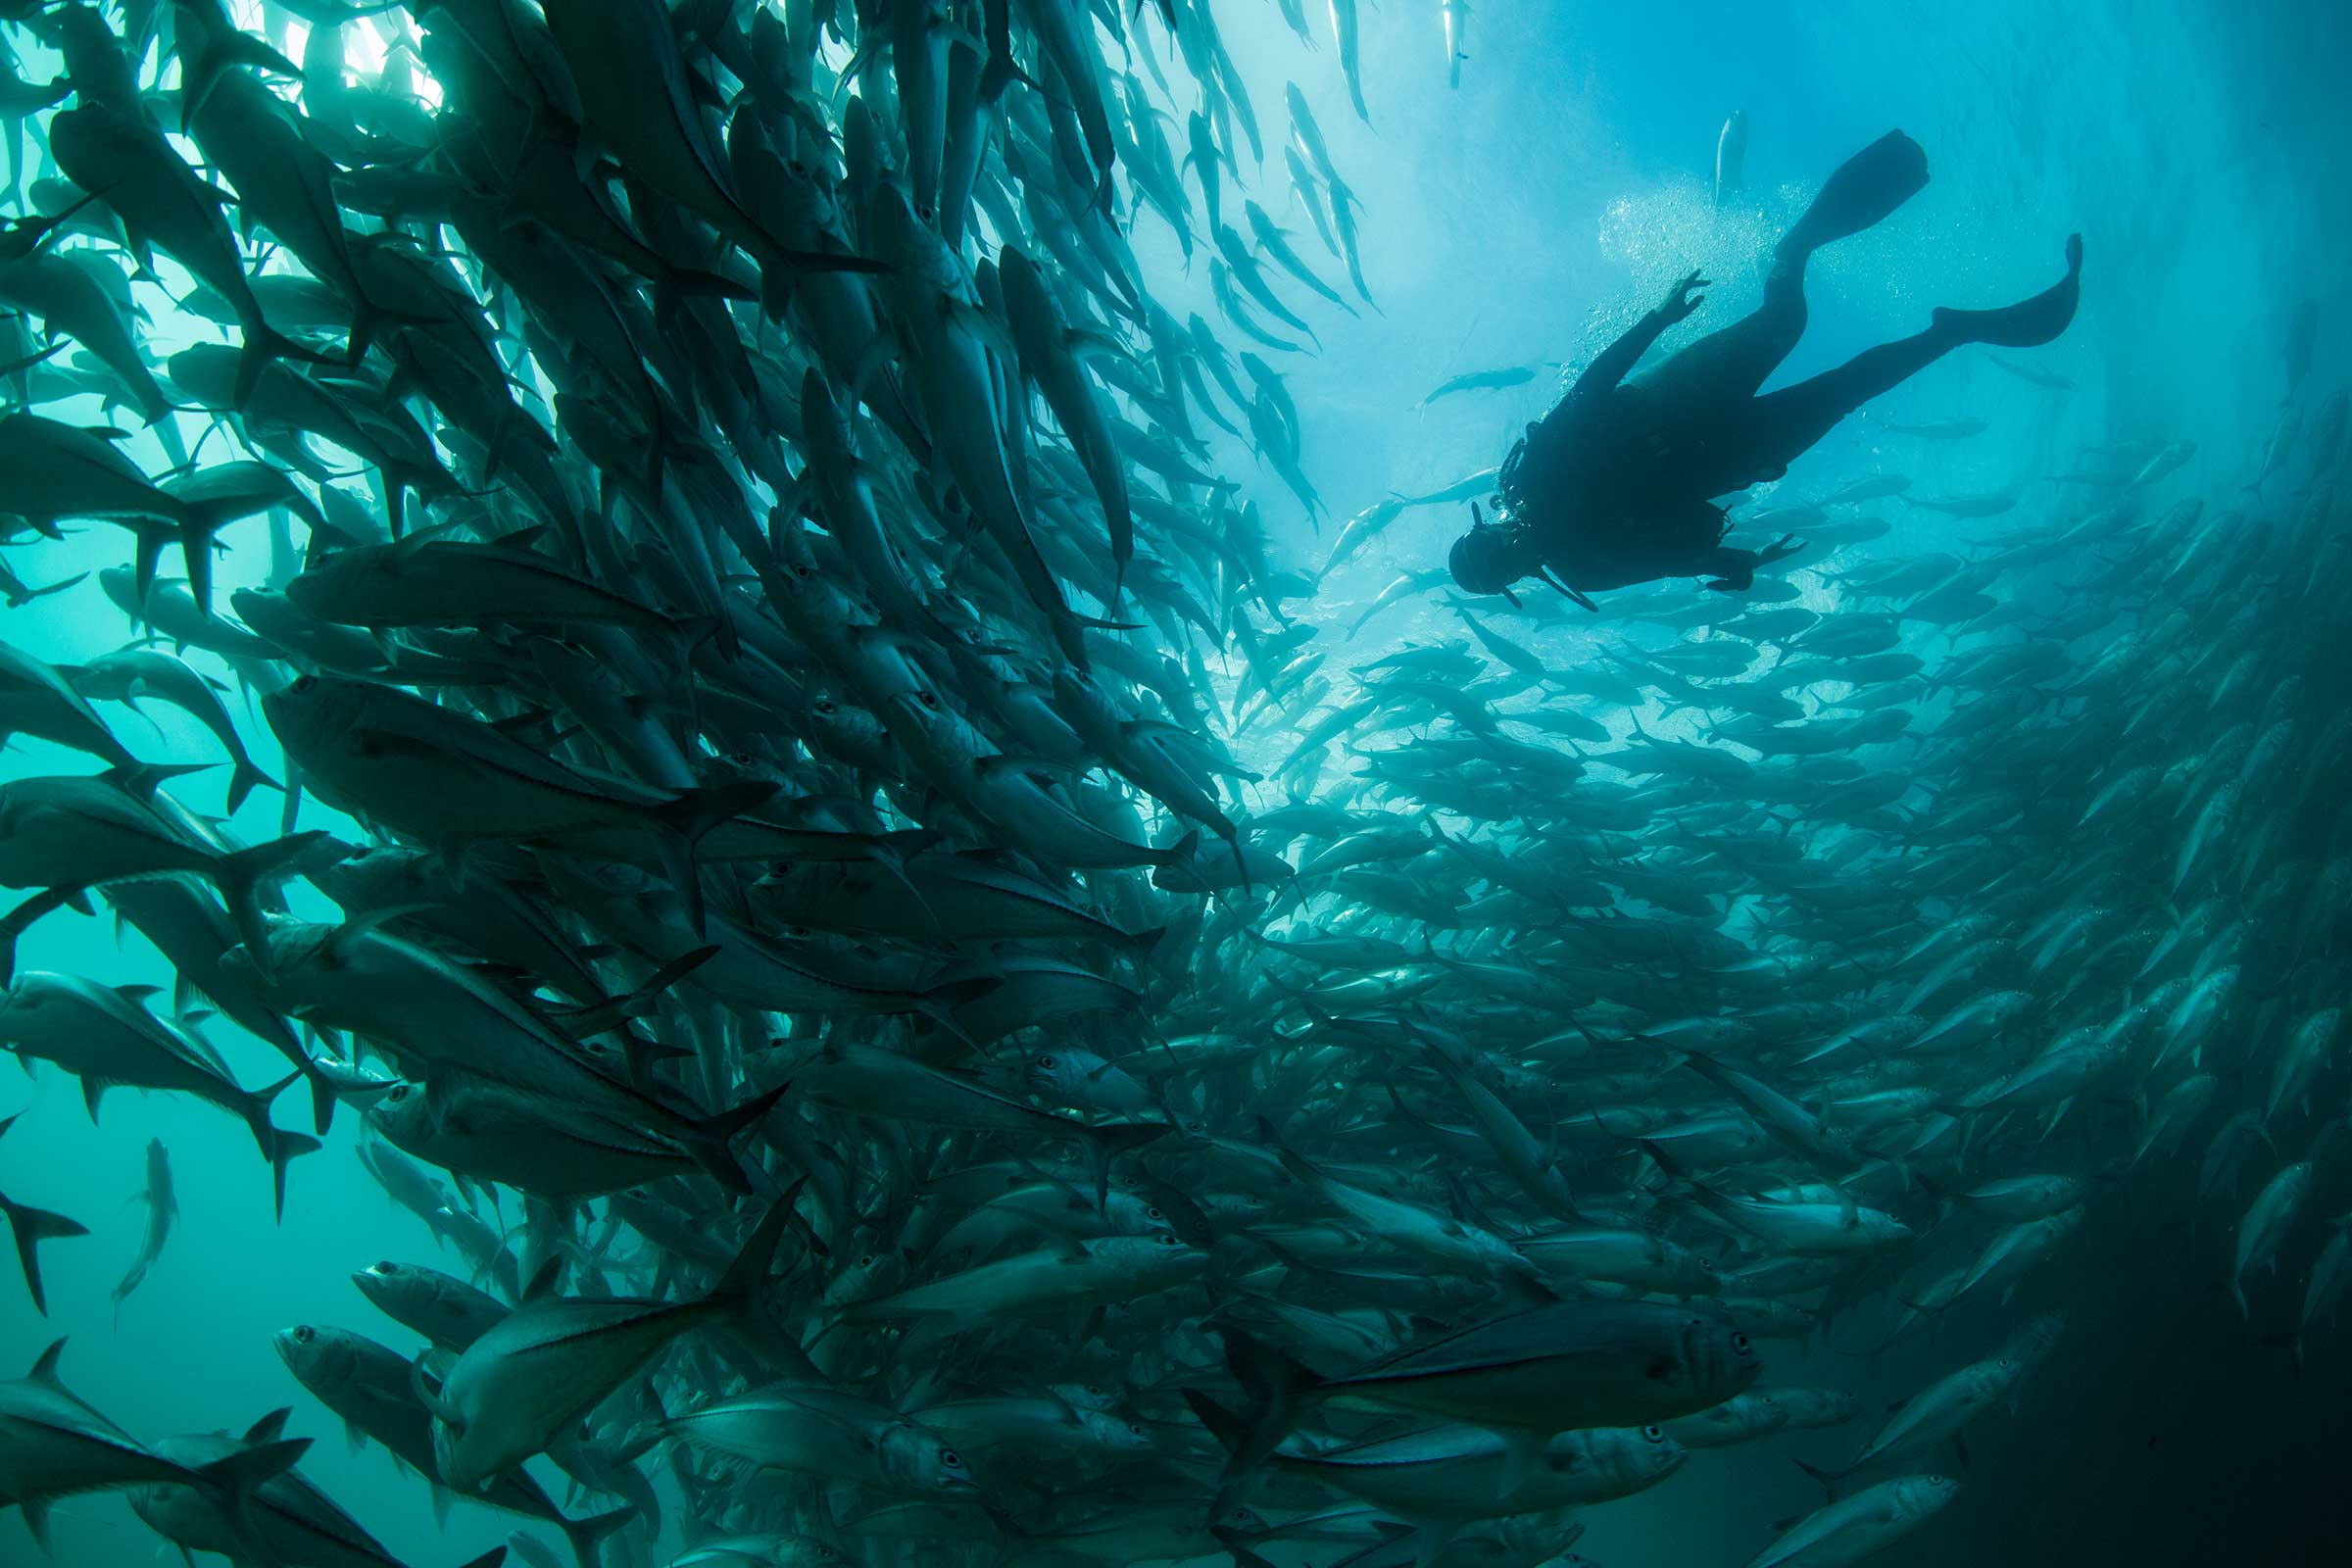 Photographer and conservationist Cristina Mittermeier dives among a school of Spanish jack in Cabo Pulmo National Park.   (Paul Nicklen—SeaLegacy)